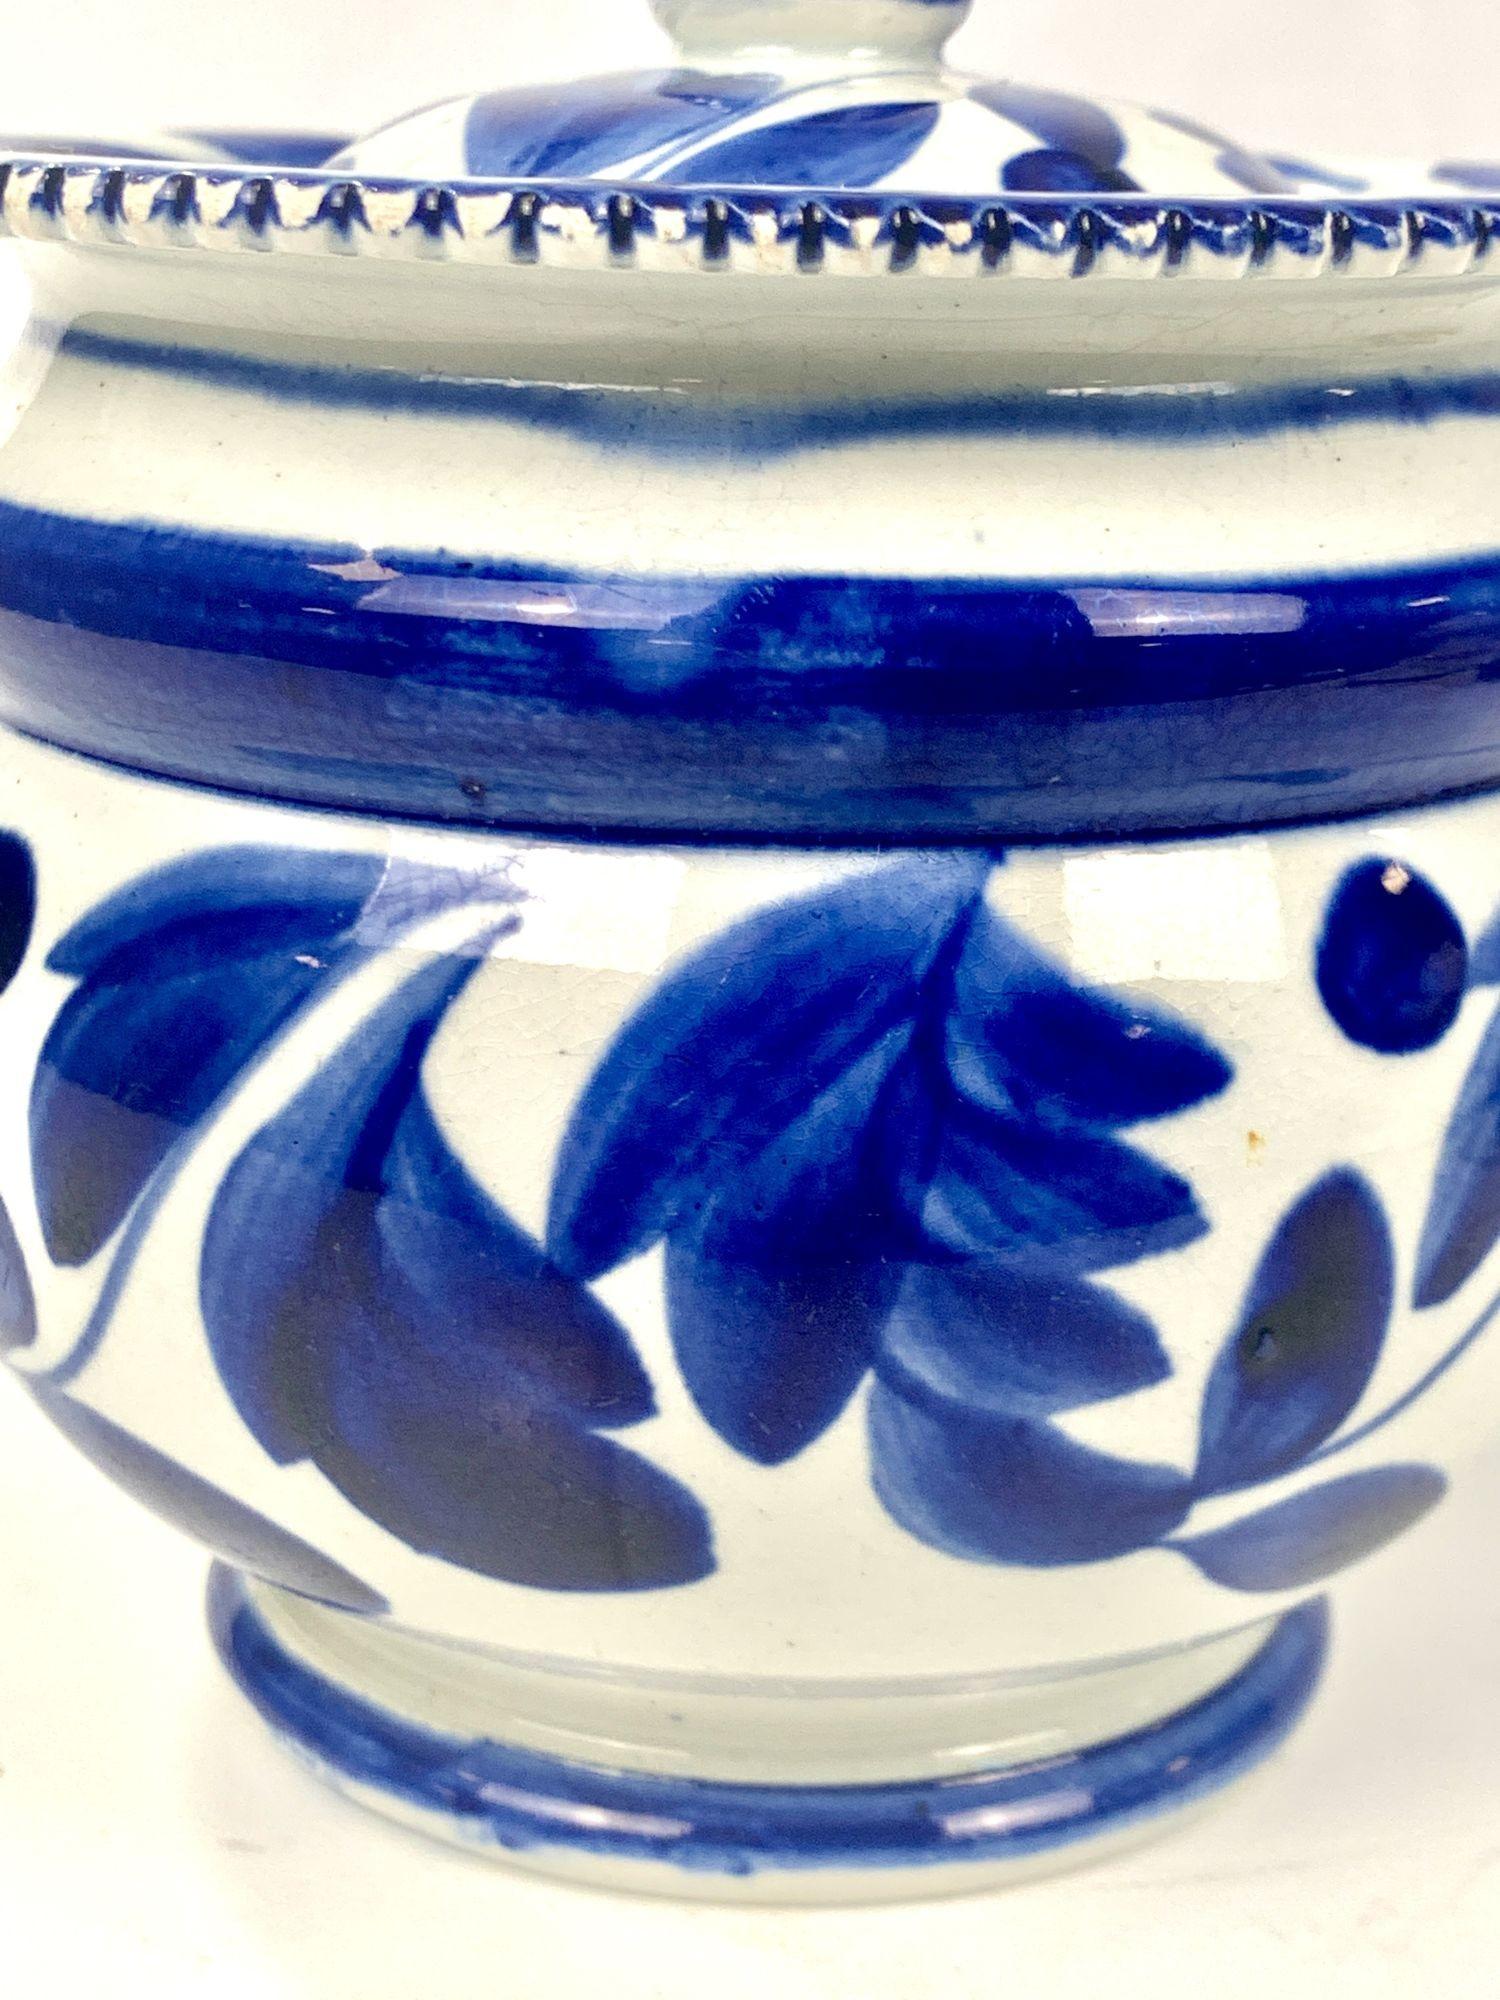 This lovely blue and white pearlware pottery sugar box is decorated with three beautiful patterns of leaves and berries. The body, the top edge around the cover, and the cover each have a similar but slightly different pattern. The edge of the sugar